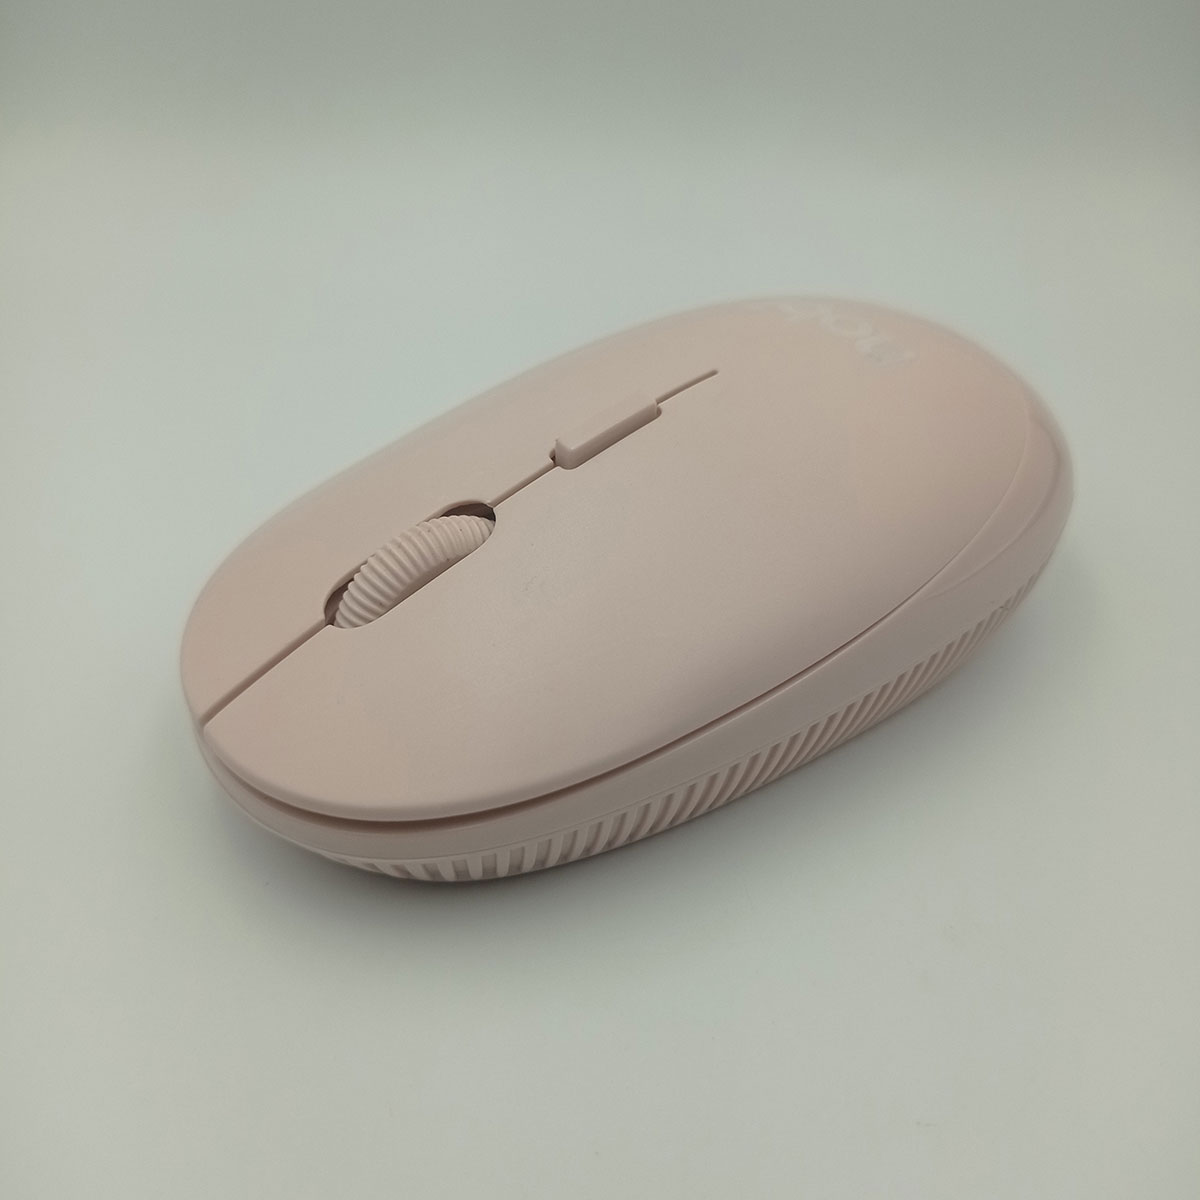 nm71-wireless-mouse-pink-01